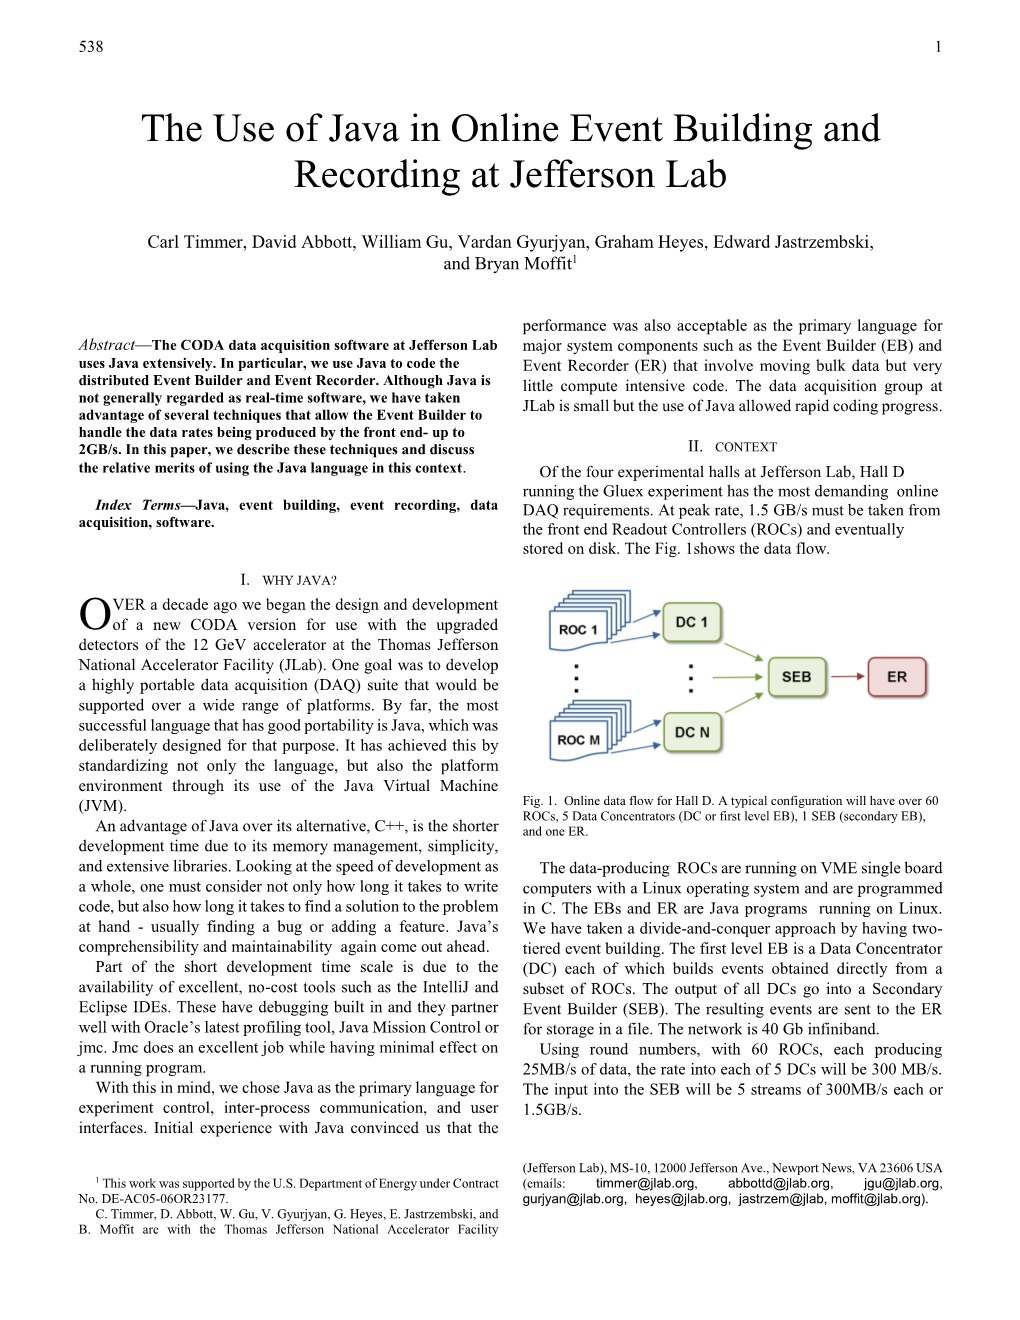 The Use of Java in Online Event Building and Recording at Jefferson Lab